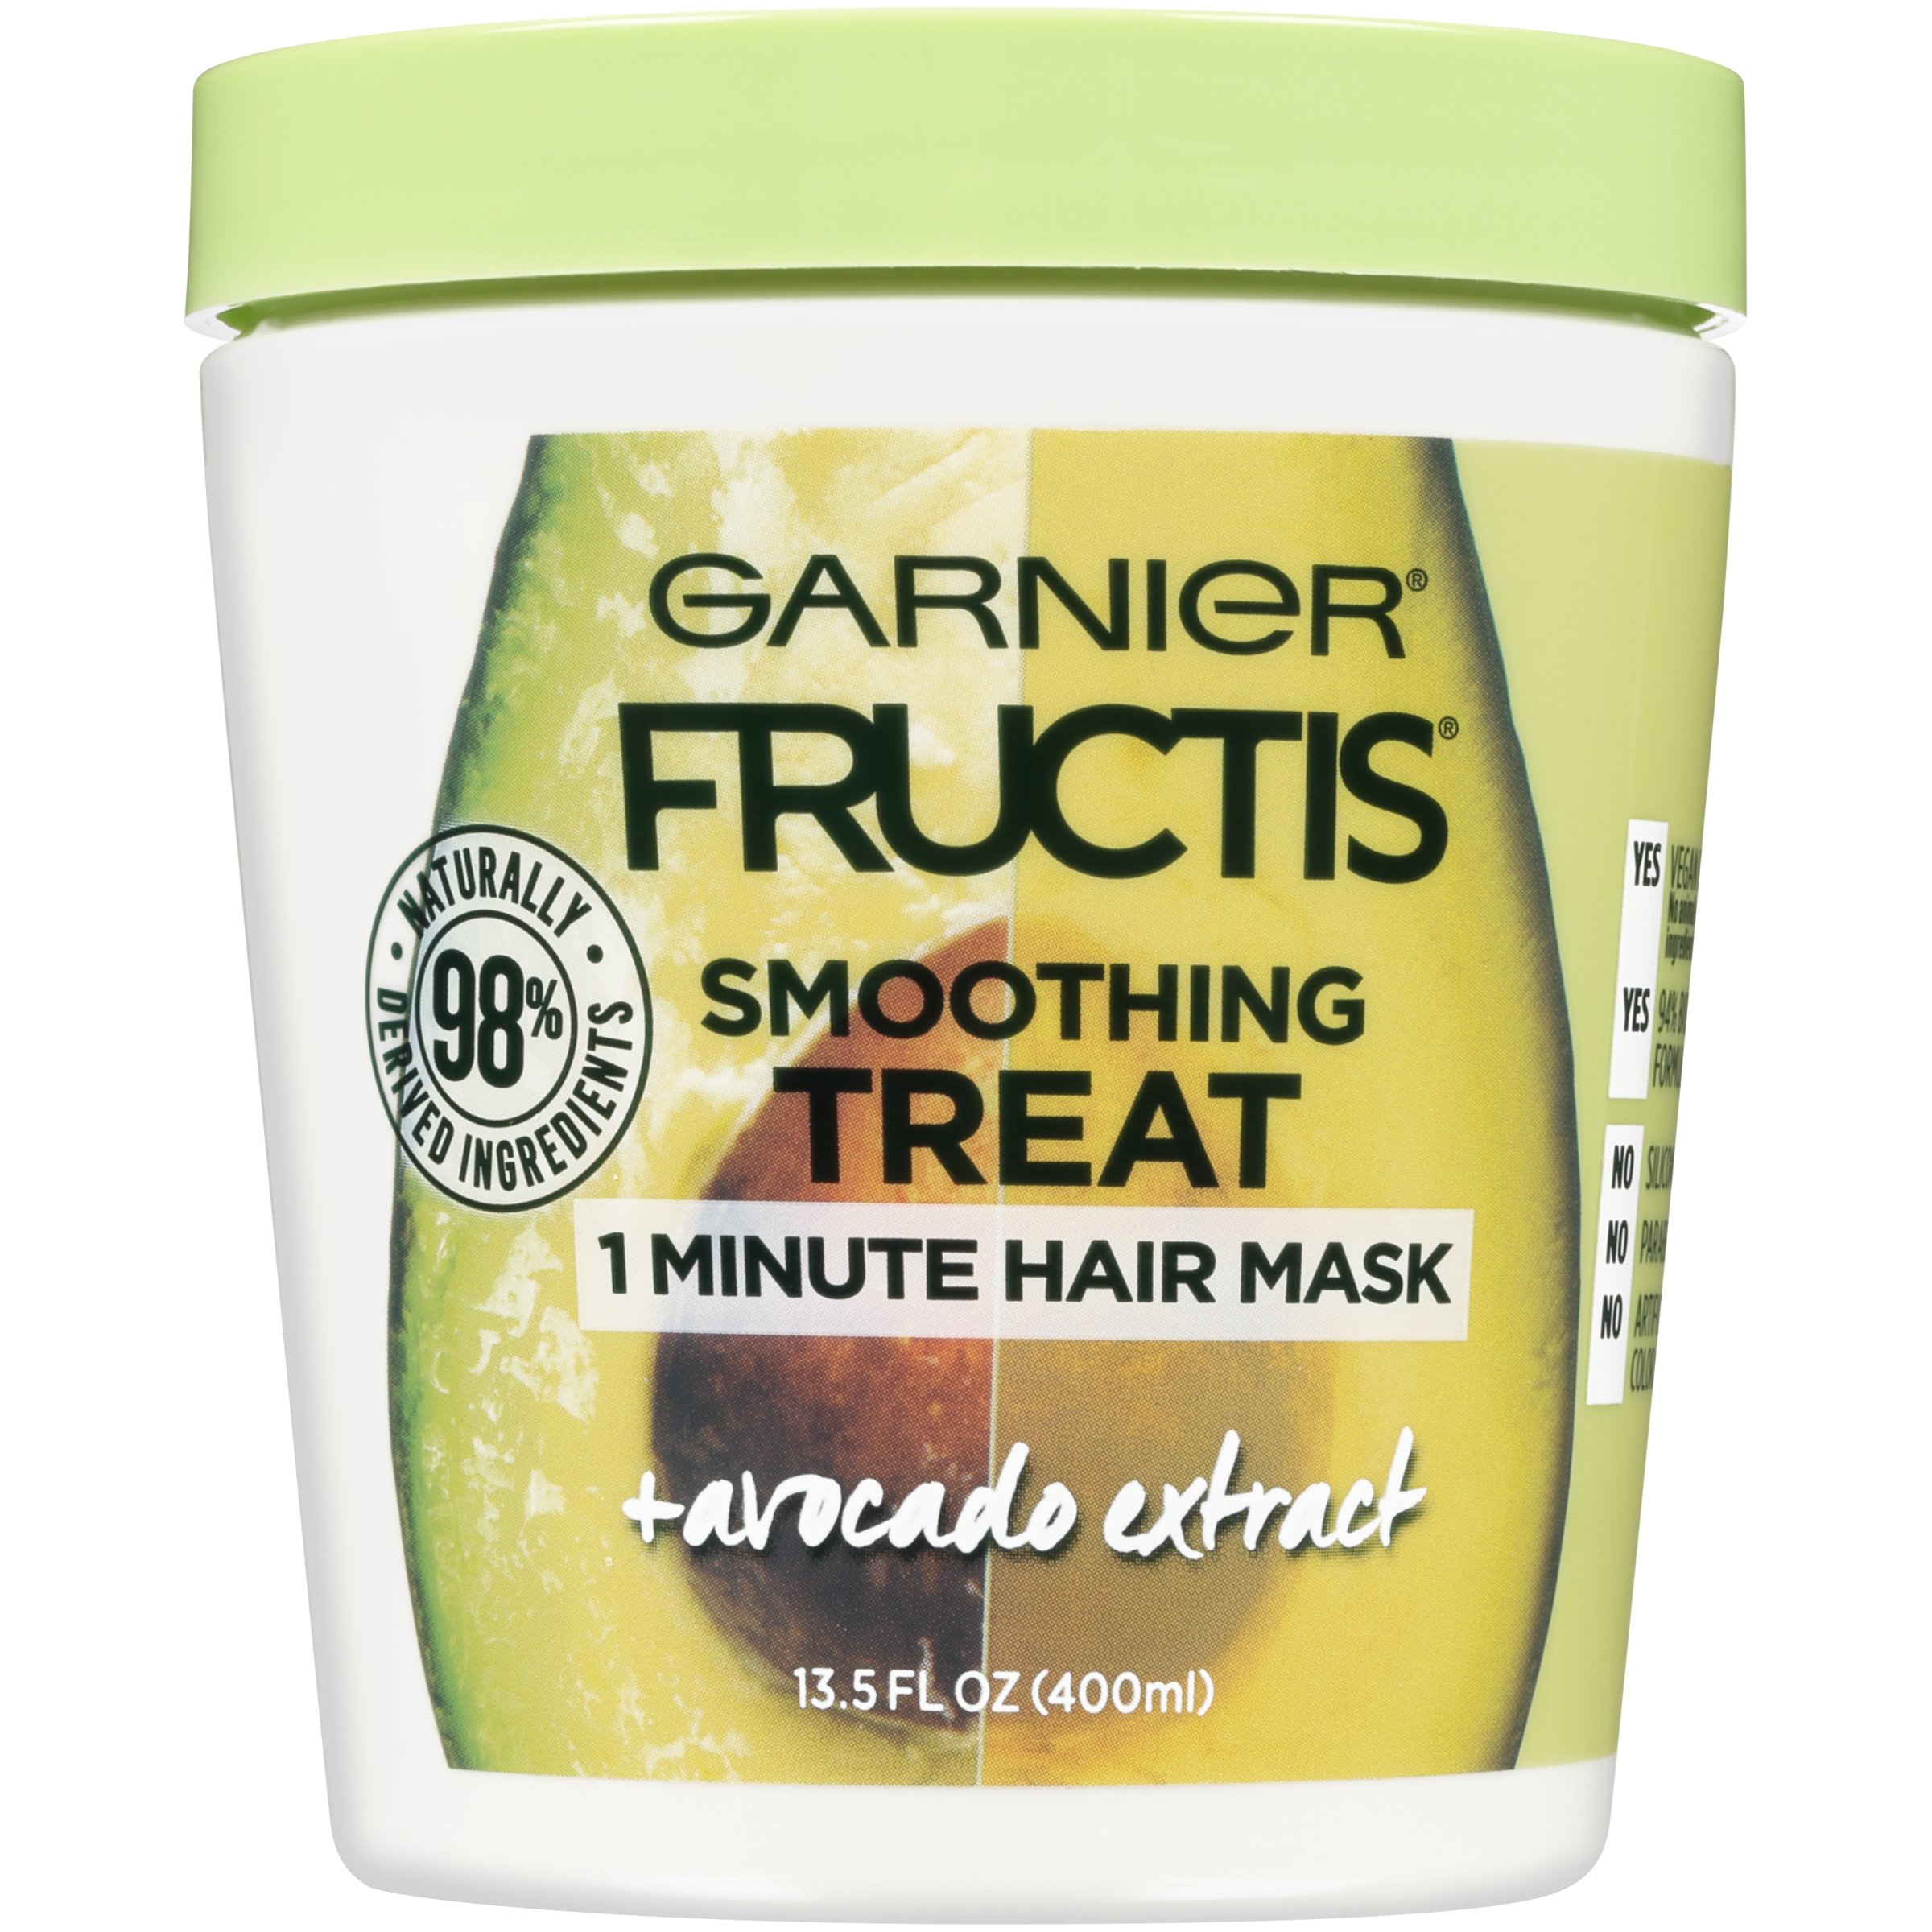 Garnier Fructis Smoothing Treat 1 Hair Mask with Avocado Extract - Shop Styling Products & Treatments H-E-B